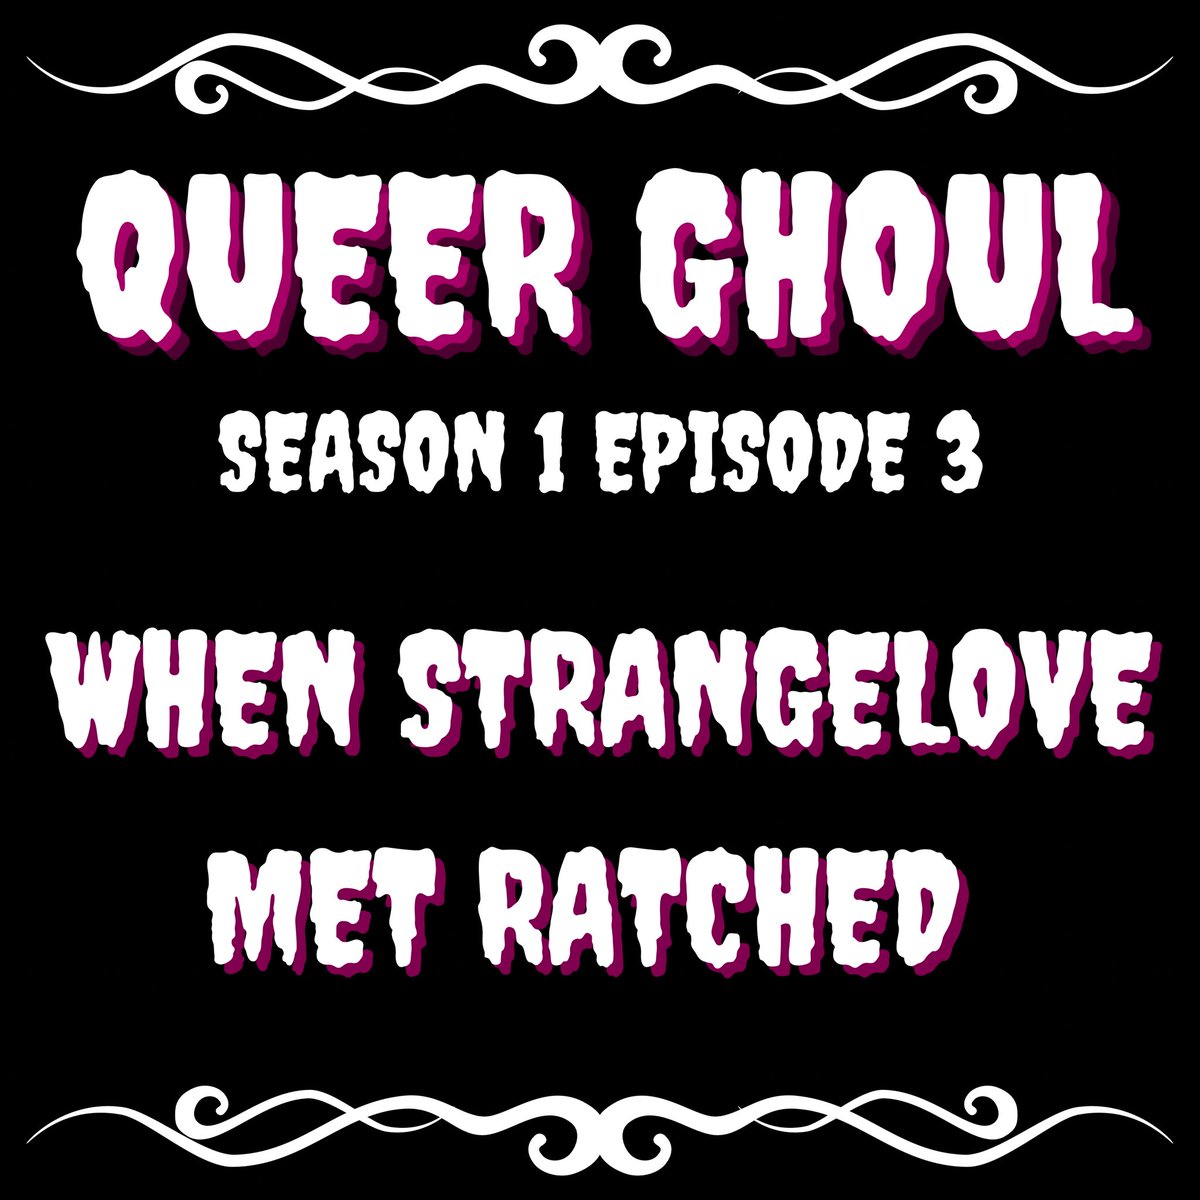 “An up and coming young rock and roller gets more than they bargained for when she acquires her role model's prized bass guitar.”

S1 E3: WHEN STRANGELOVE MET RATCHED is out now all major platforms! #QueerGhoulPod 

#Podcasts #Horror #LGBTQ #HorrorPodcast #FictionPodcast